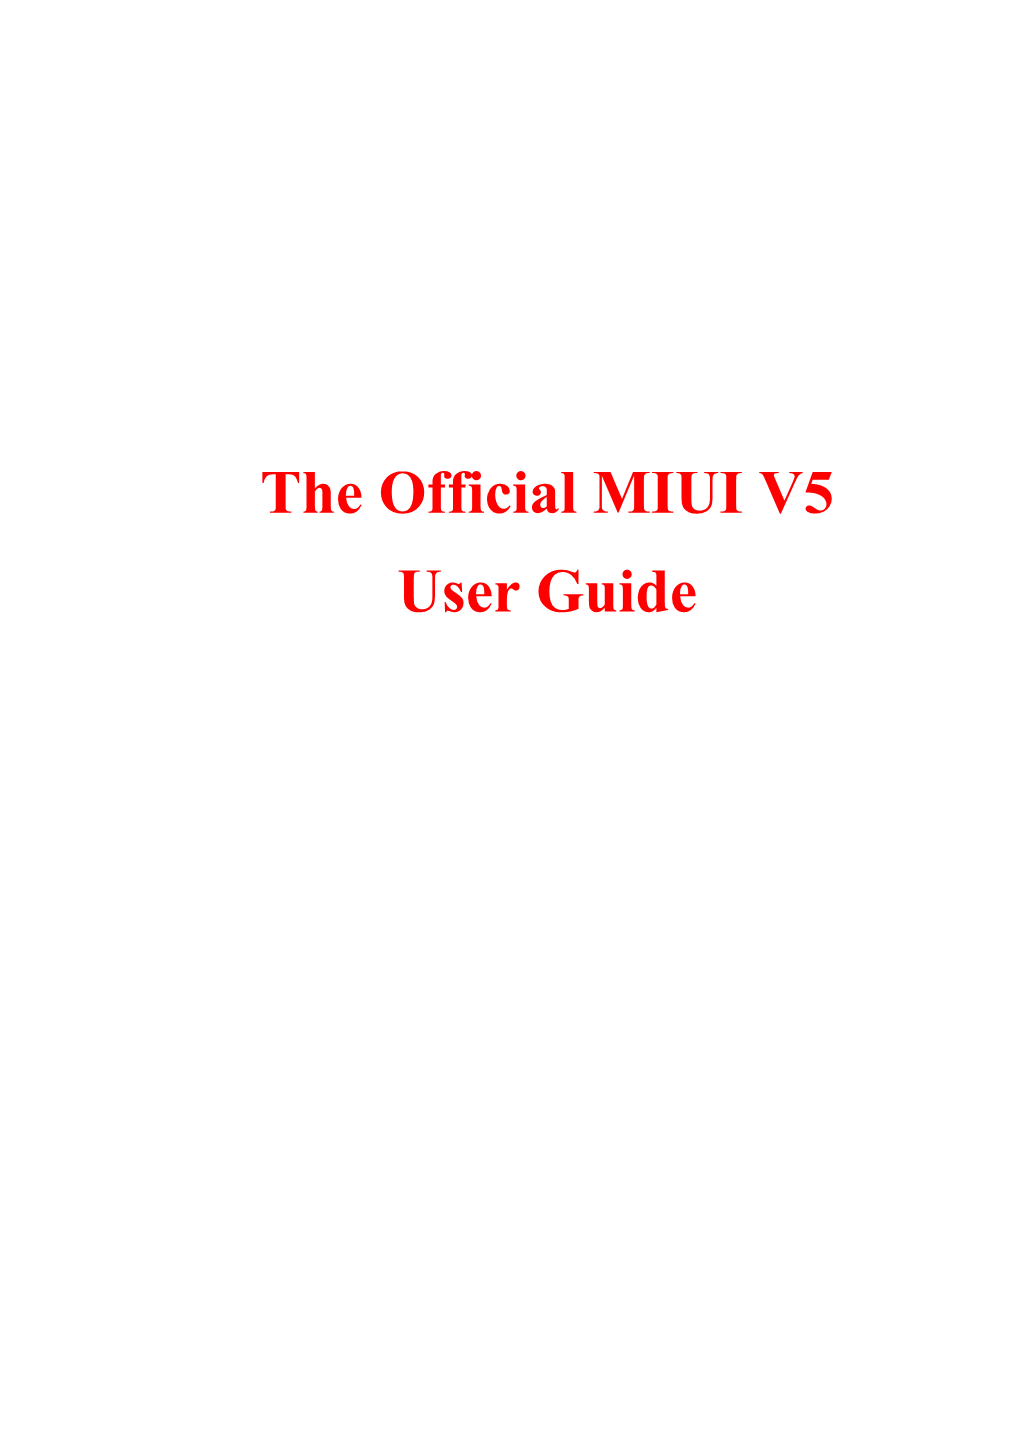 The Official MIUI V5 User Guide